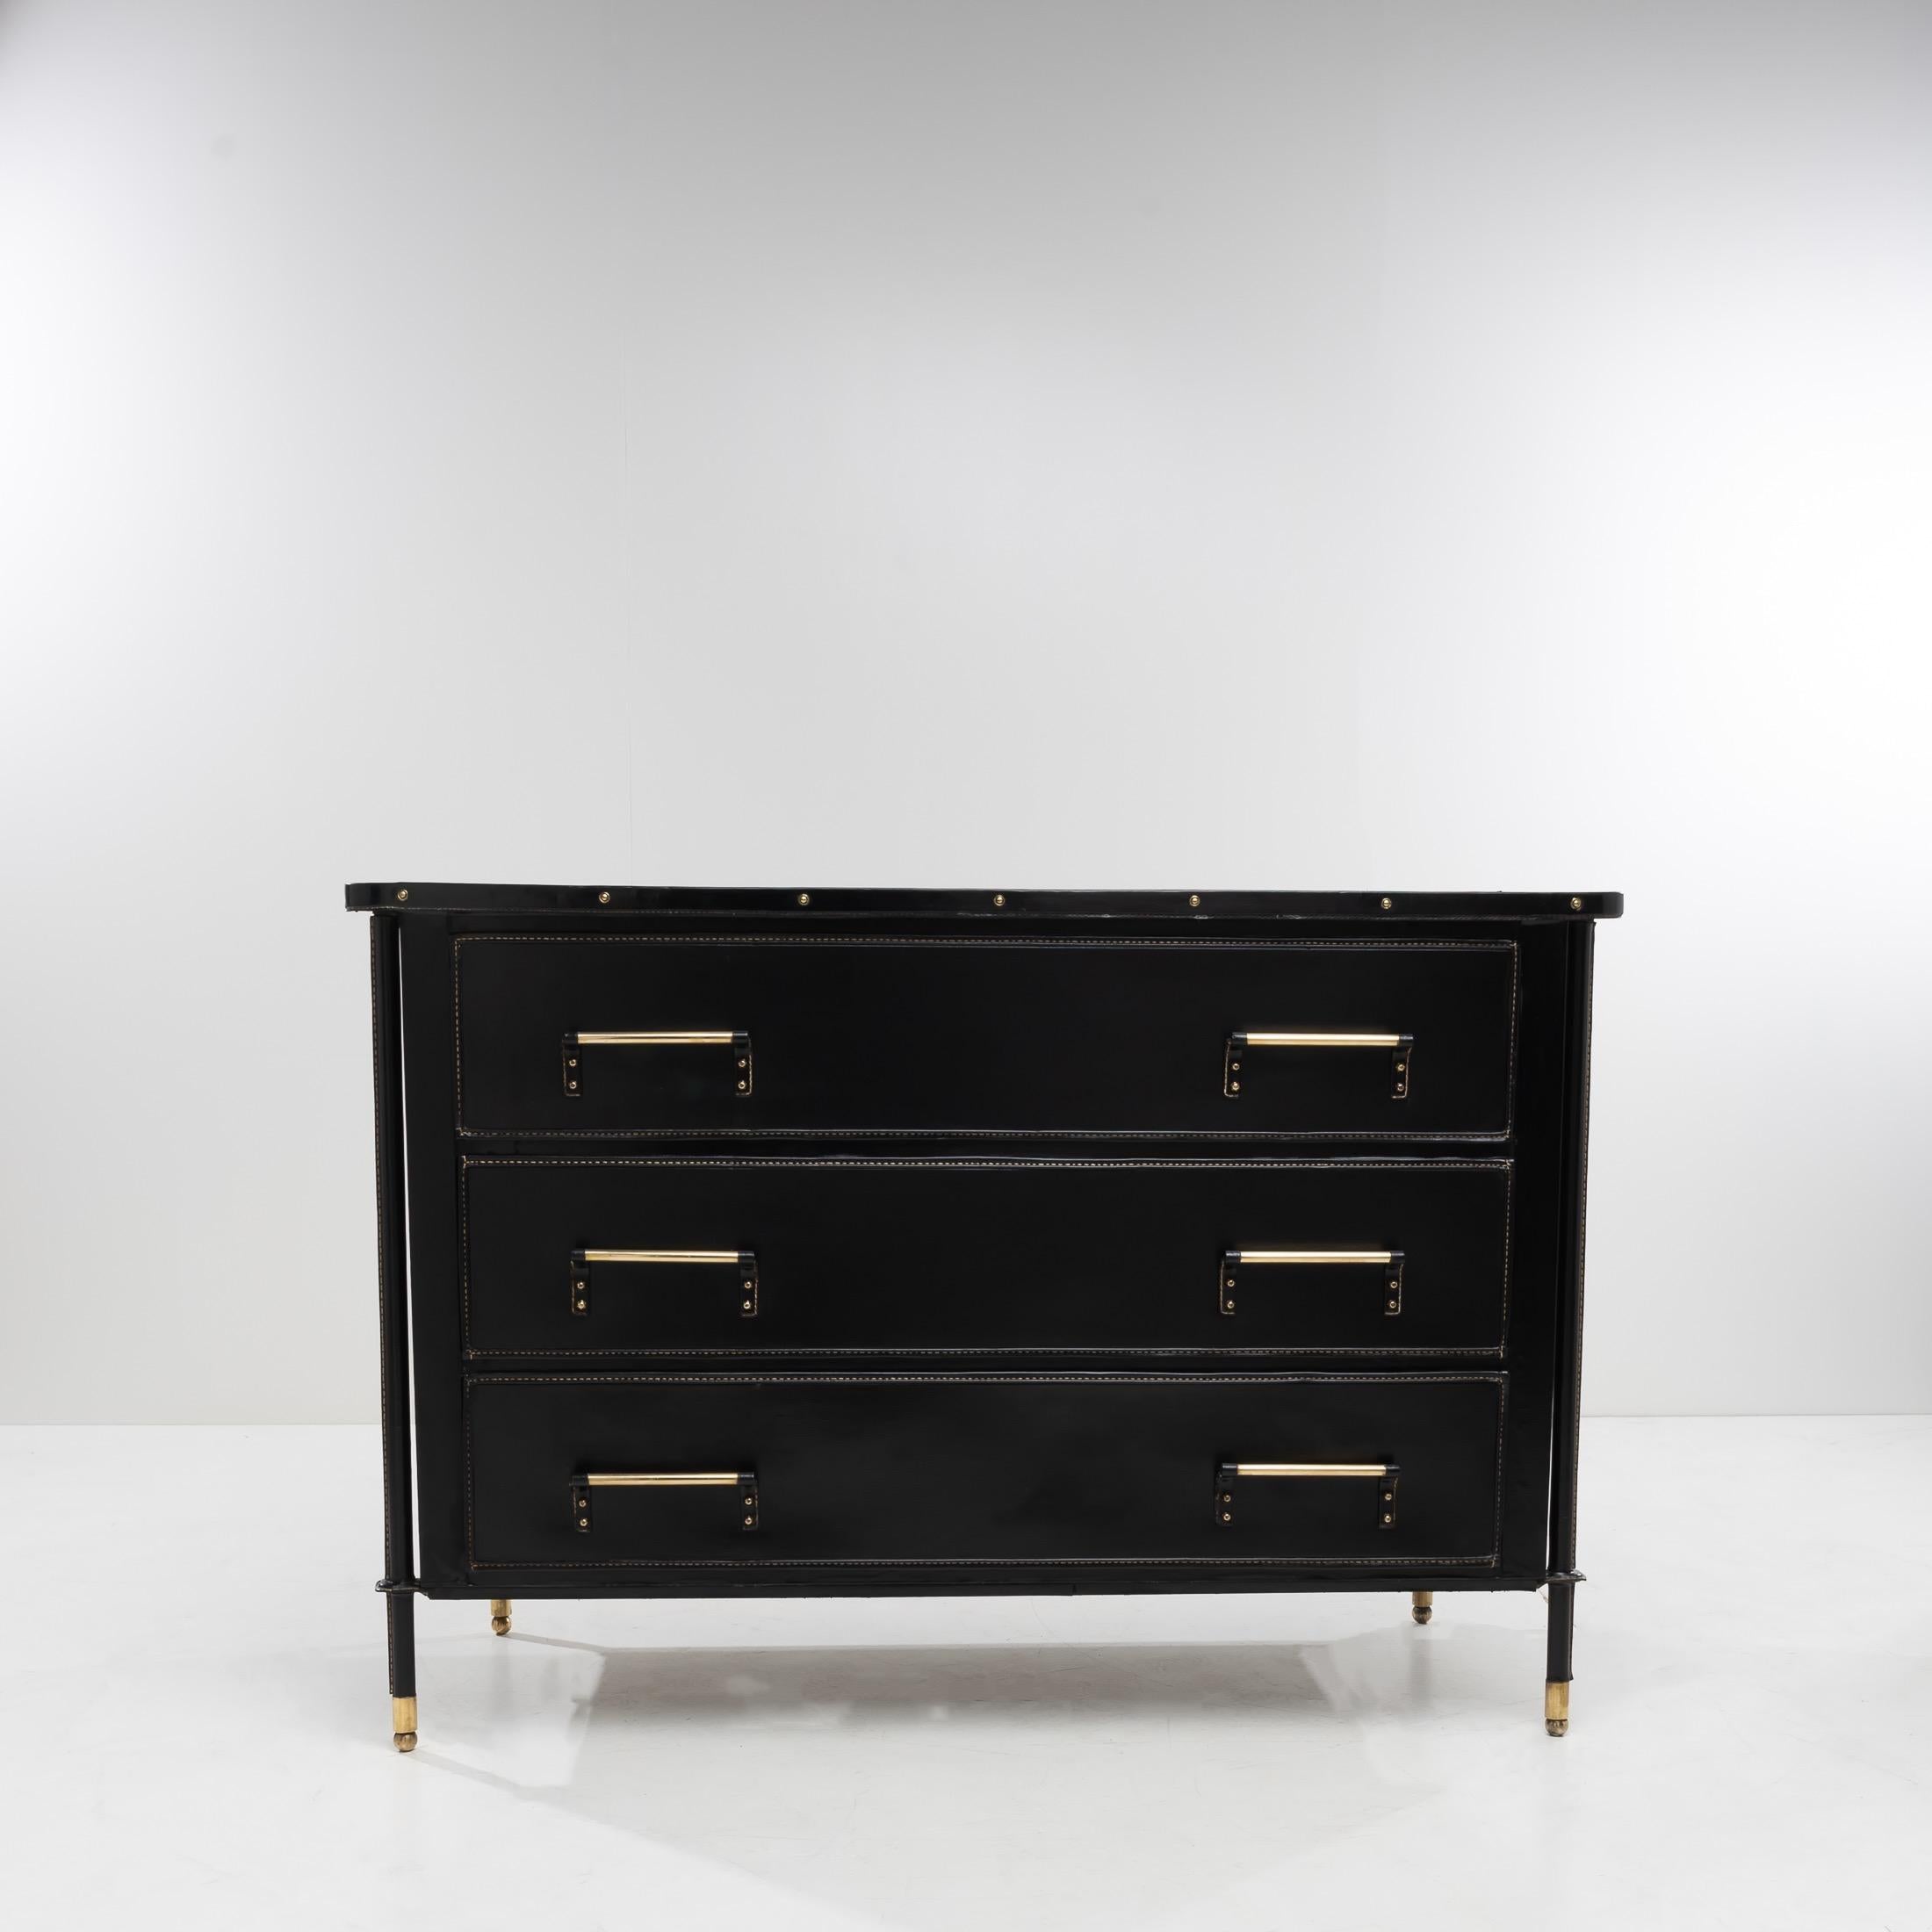 Chest of large drawers whose wooden structure is entirely sheathed in saddle stitched black imitation leather.
The front legs run along the sides of the cabinet to join the underside of the upper plate, they are also sheathed.
Each foot is